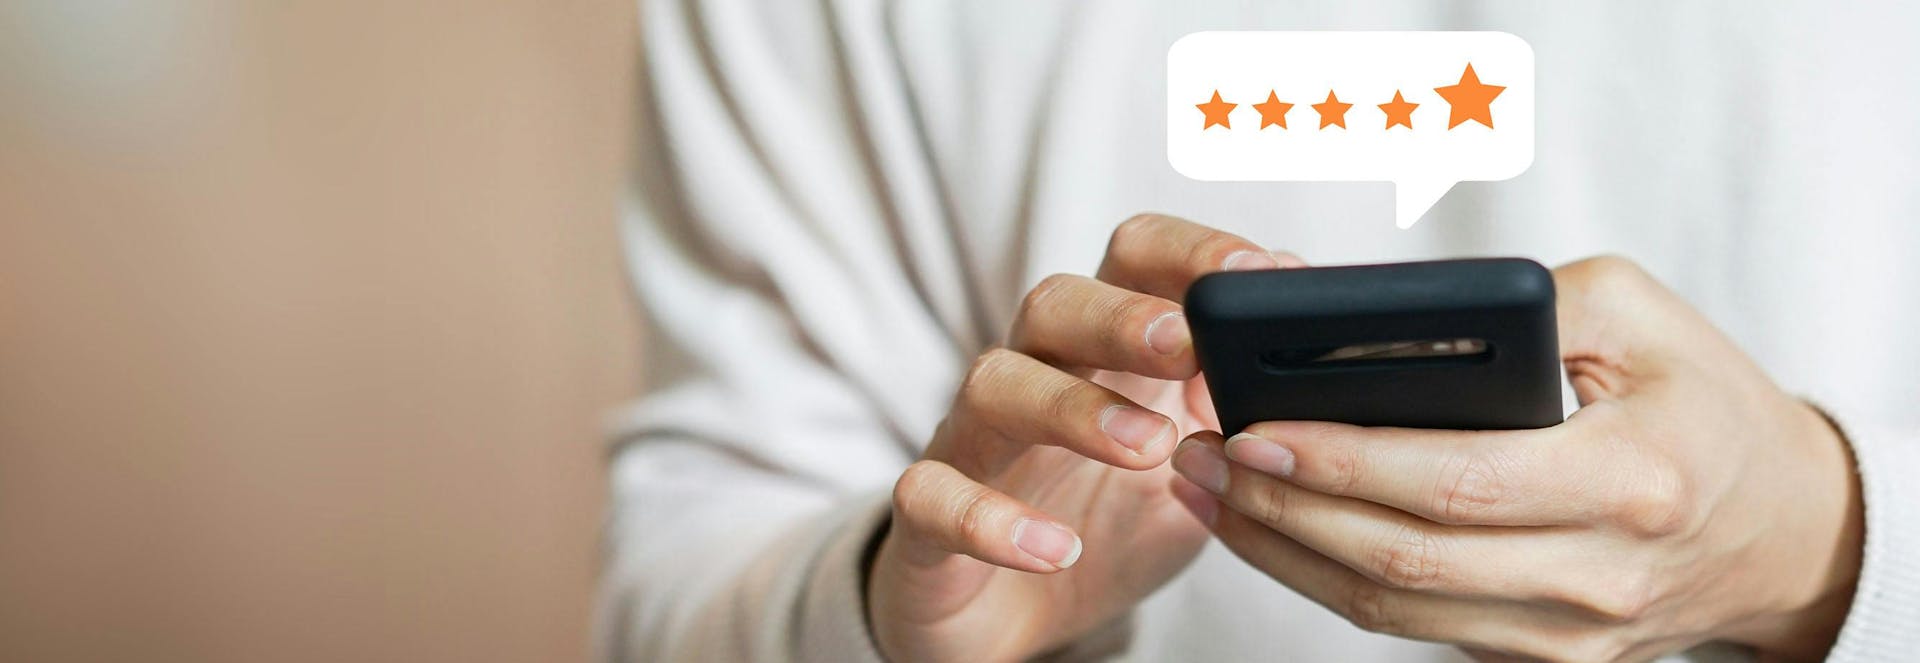 A hand playing on a phone with a speech bubble featuring 5 stars